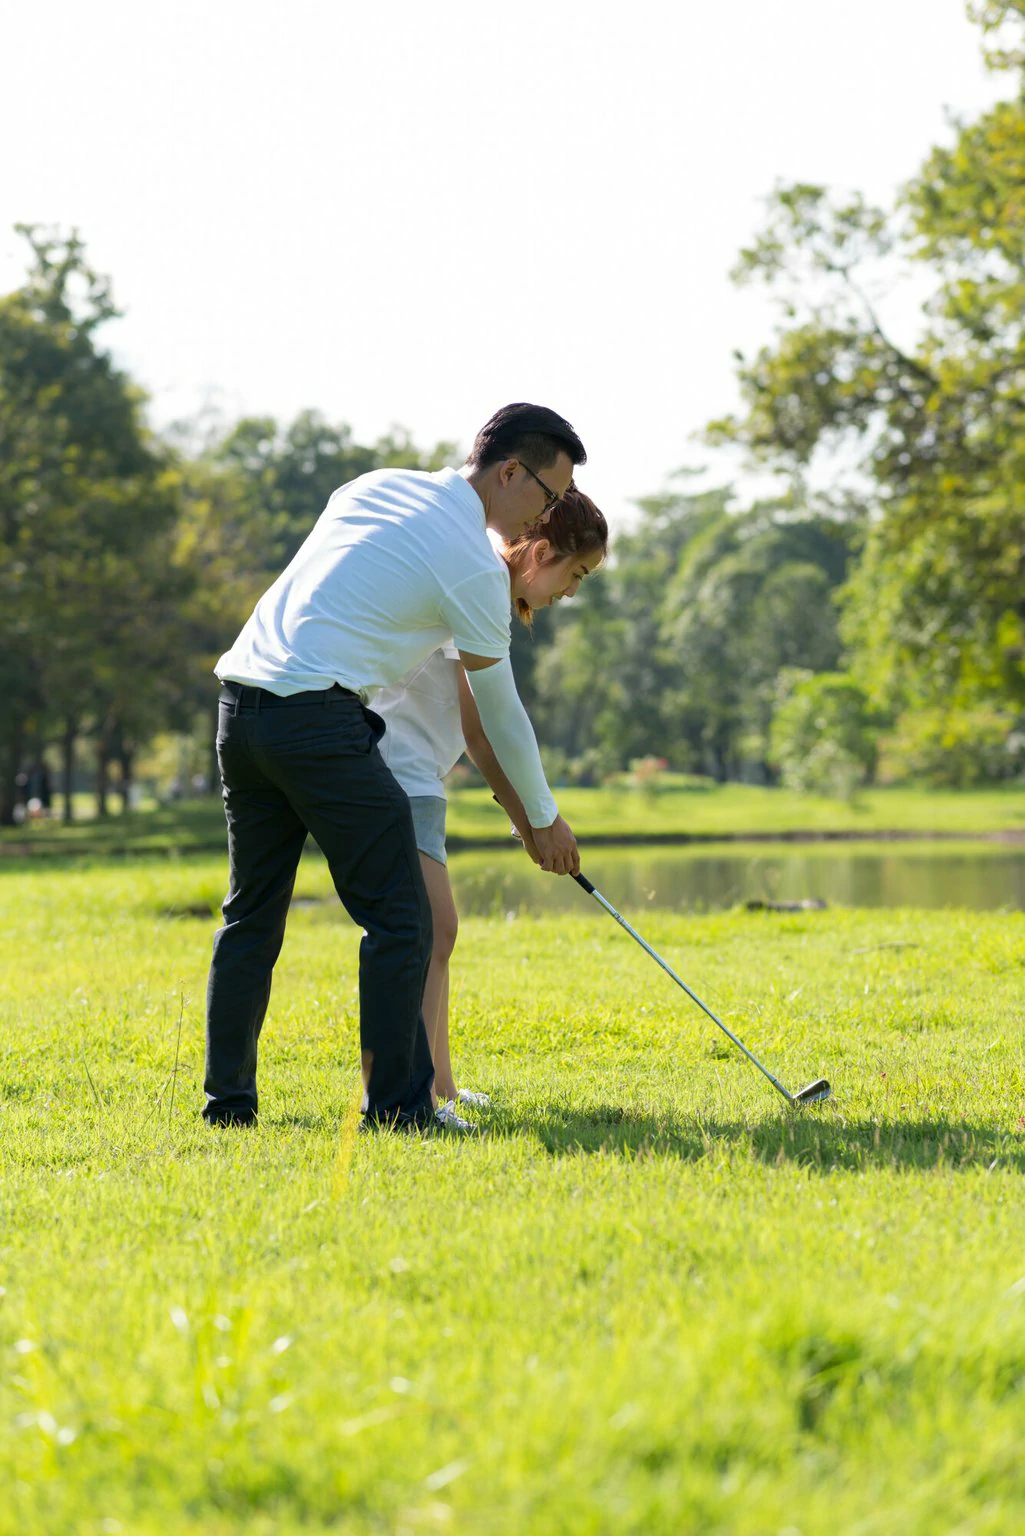 How to Find Cheap Golf Lessons without Compromising Quality